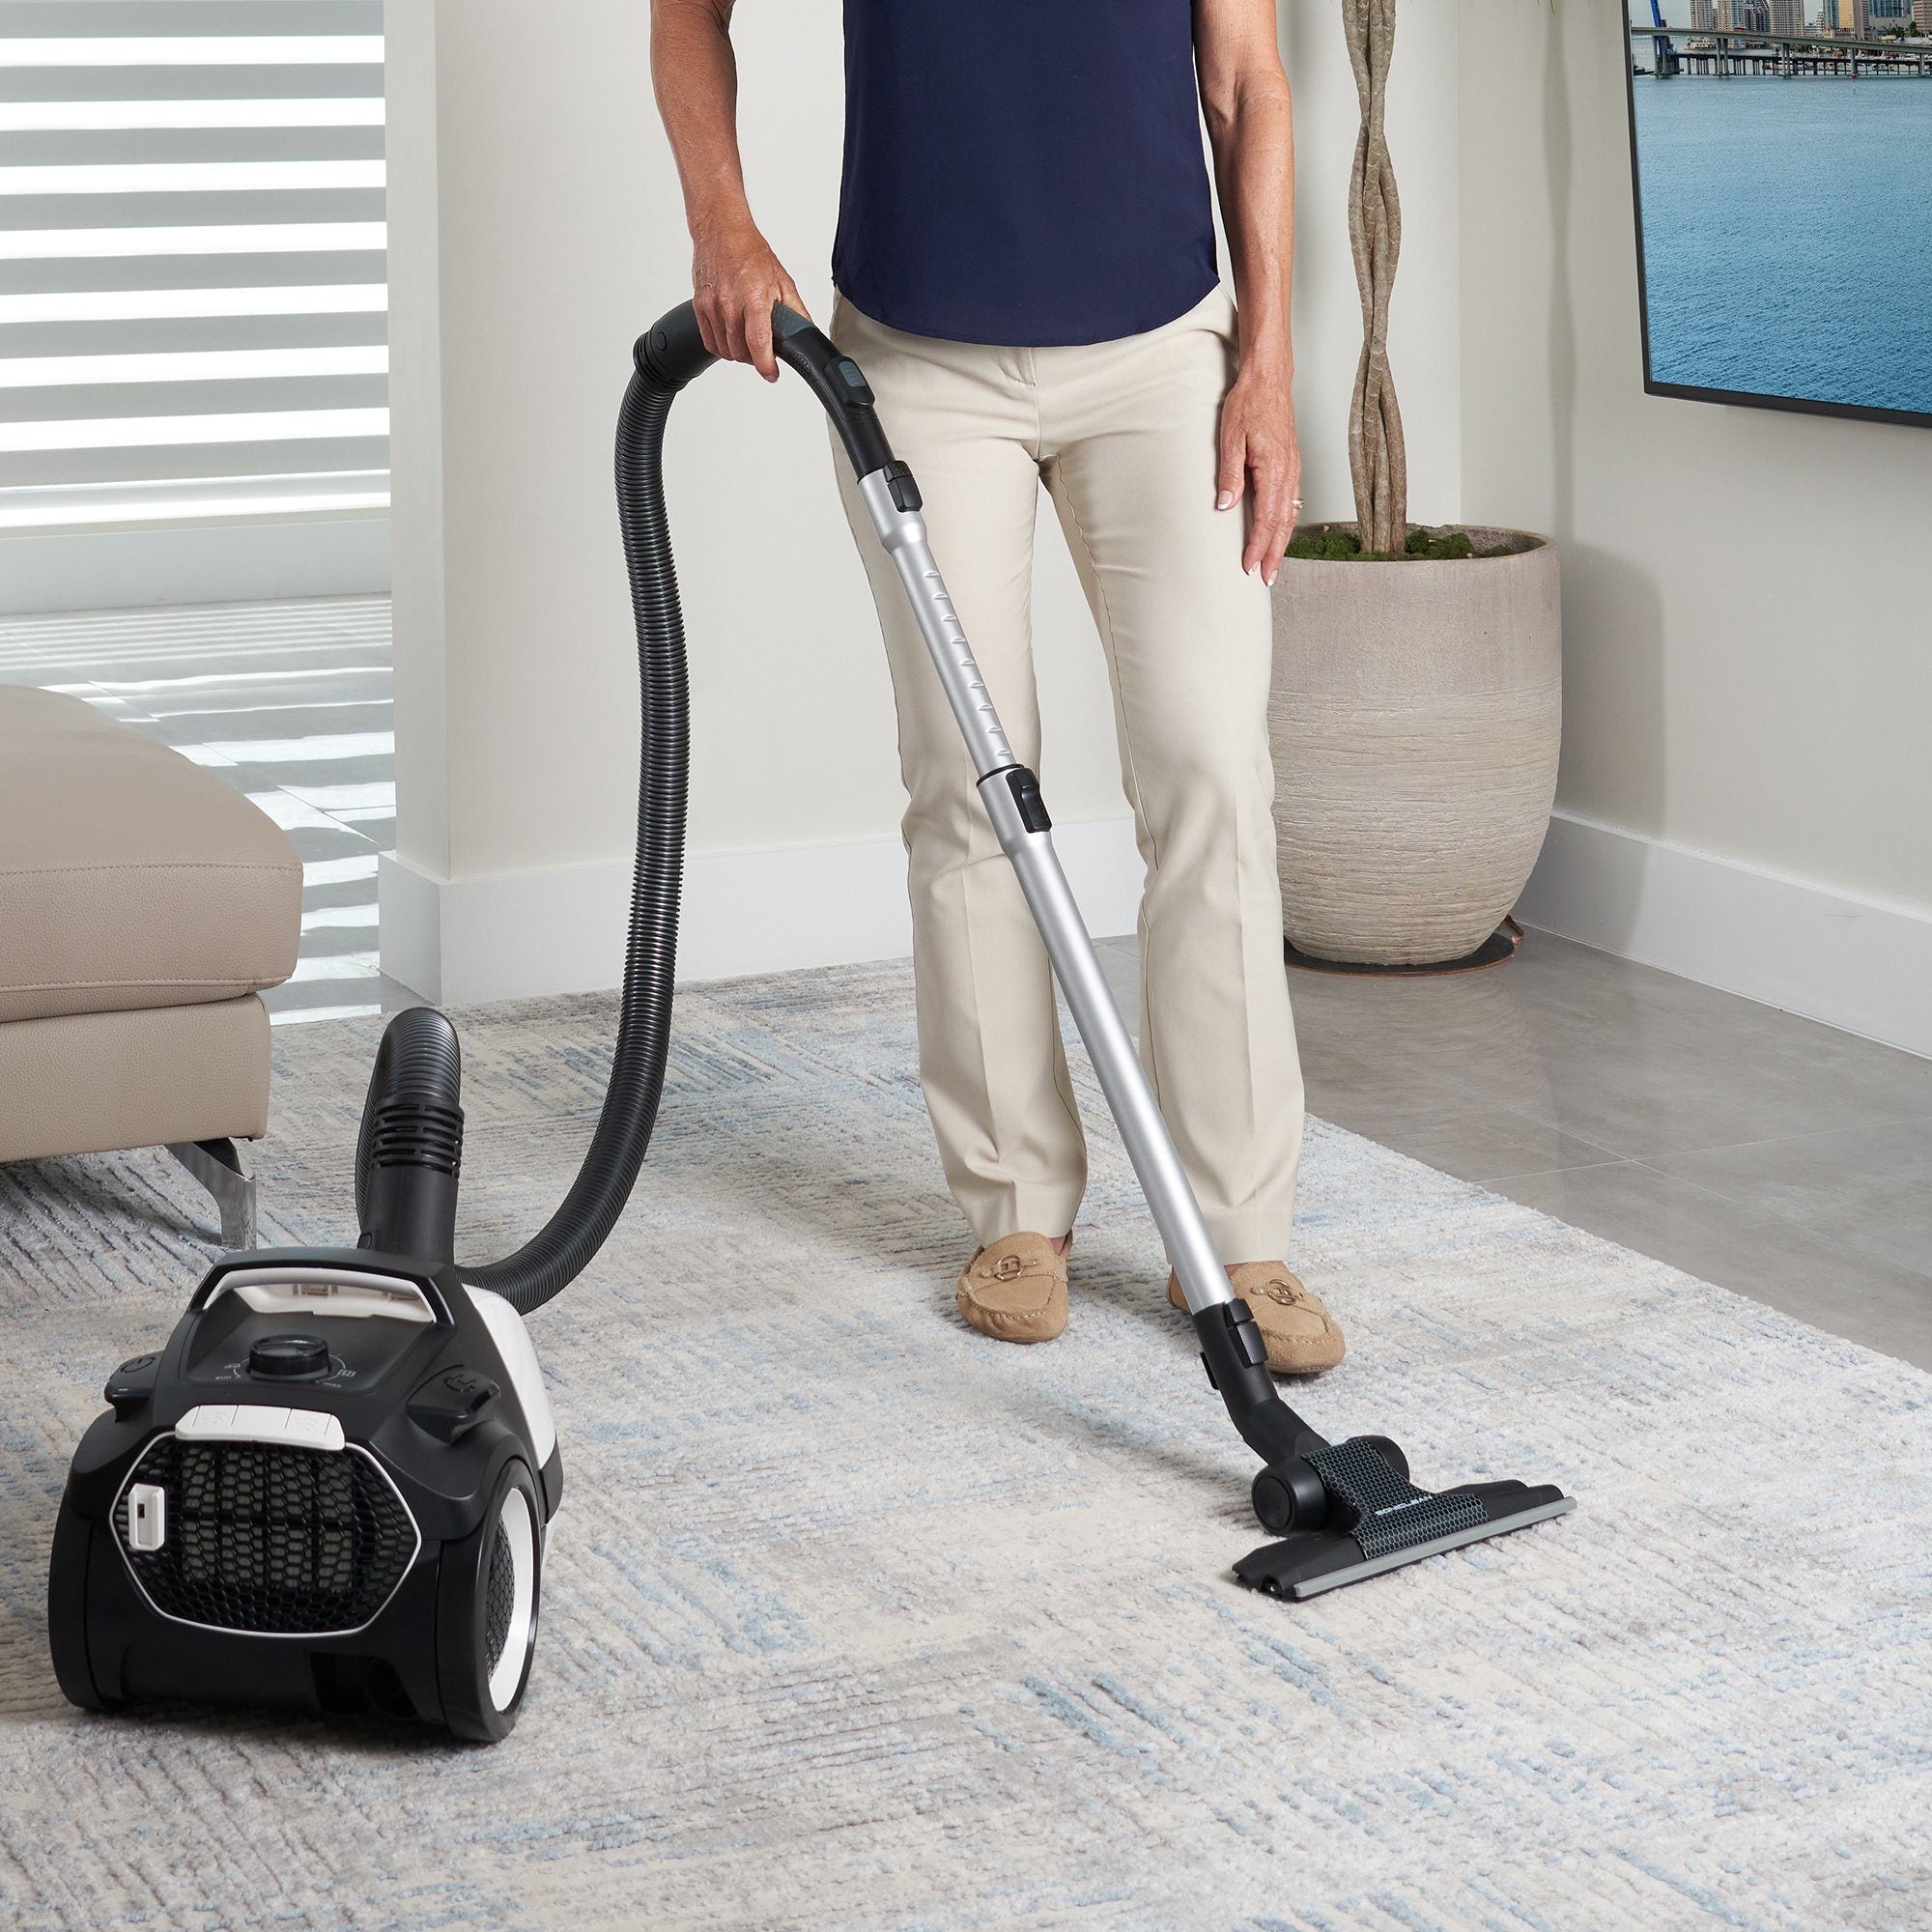 WhisperJet C2 Canister Vacuum Cleaner (+Turbo Nozzle) - Soniclean